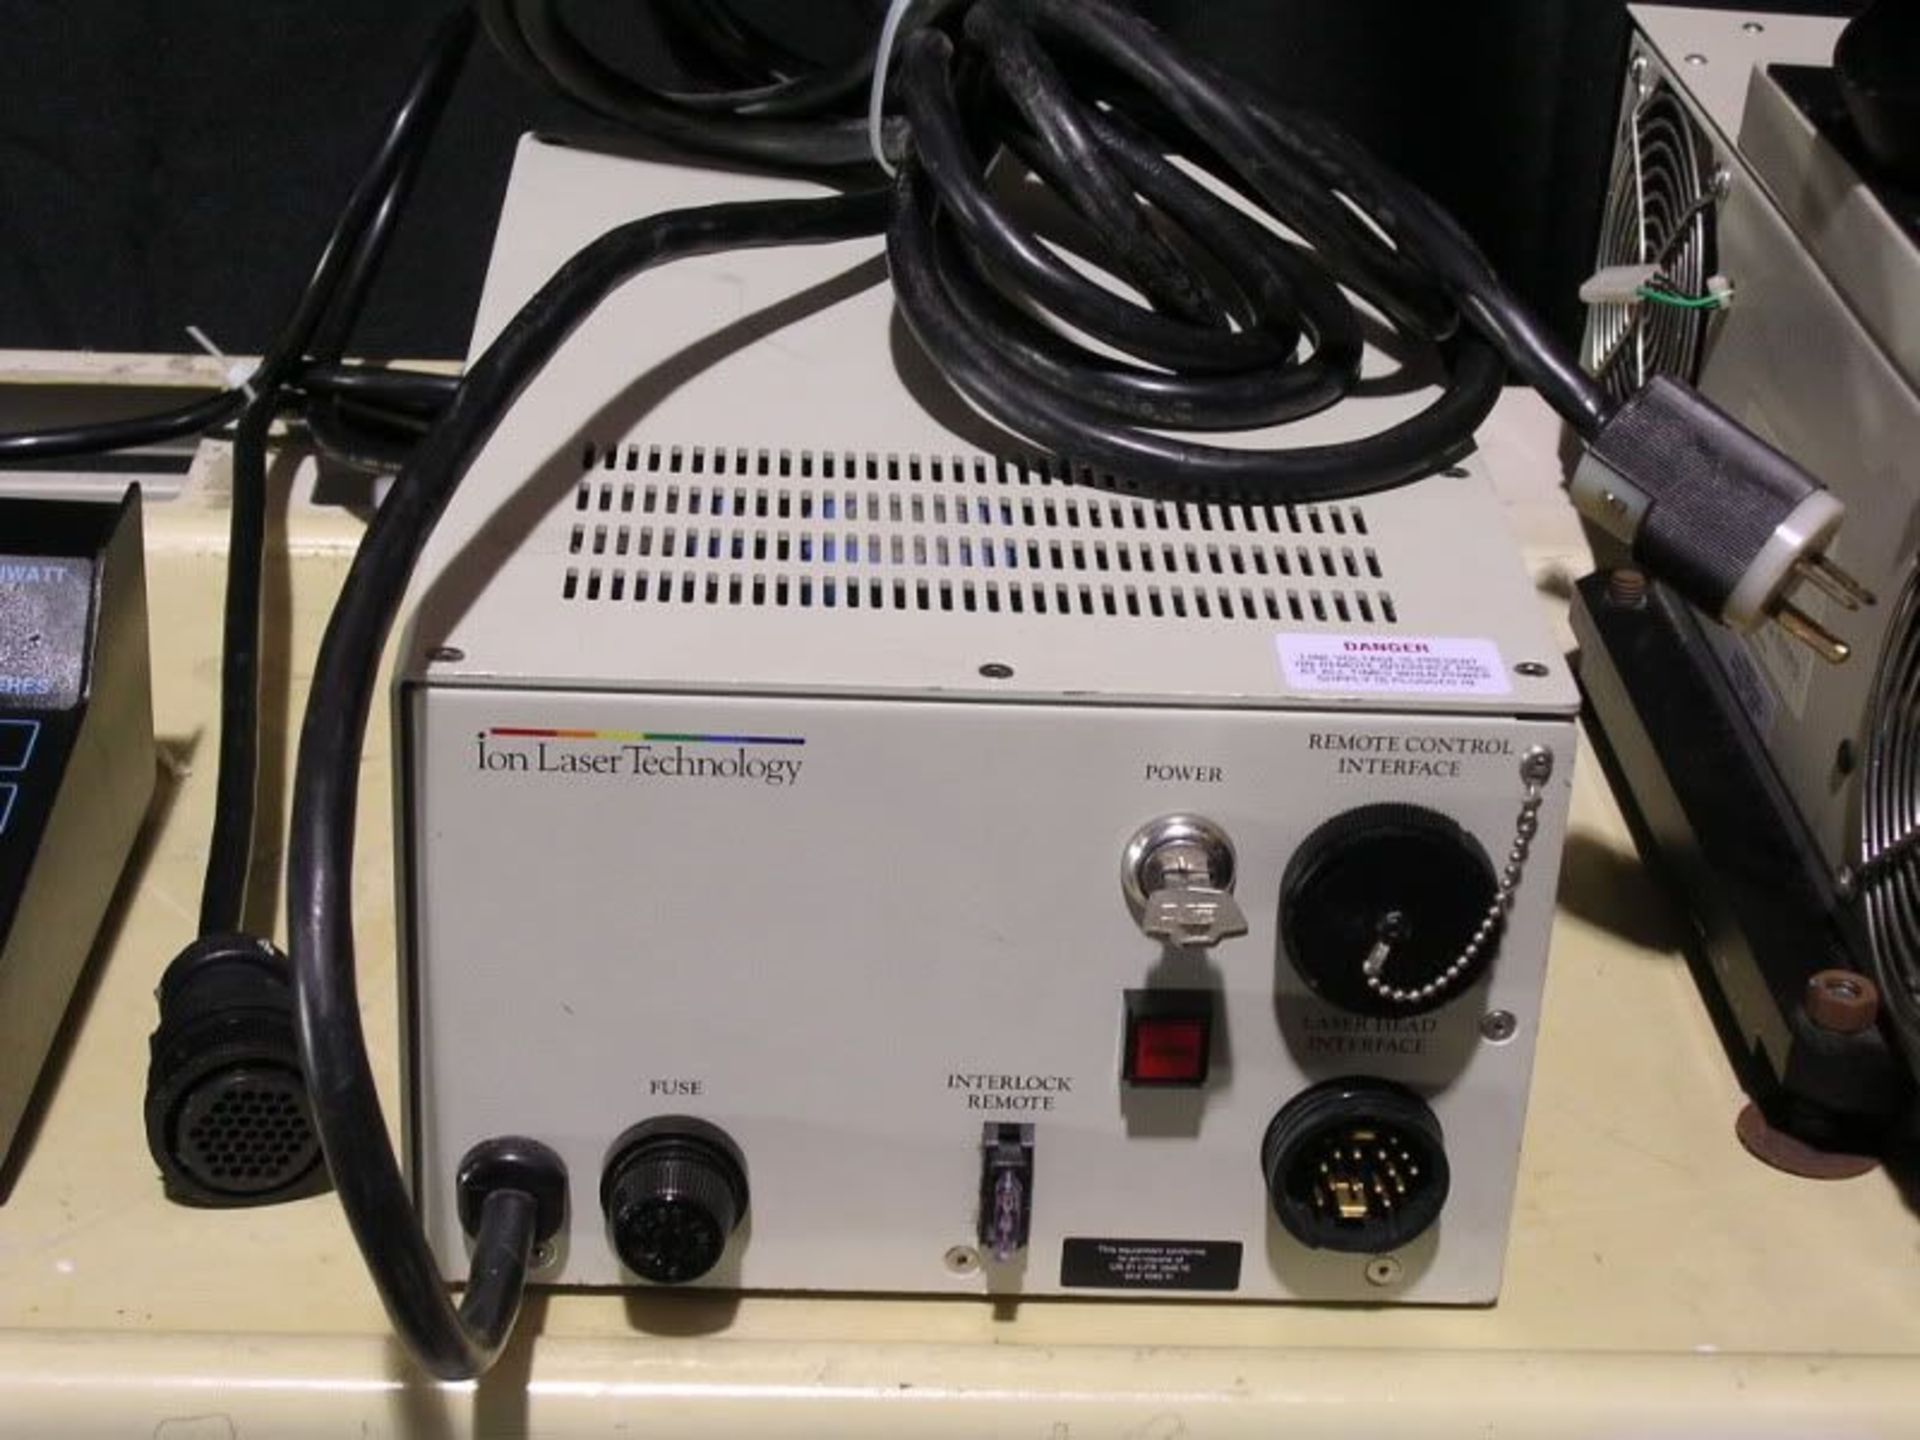 Ion Laser Technology 5500 Series Argon W/ Control Unit, Qty 1, 321462198421 - Image 3 of 8